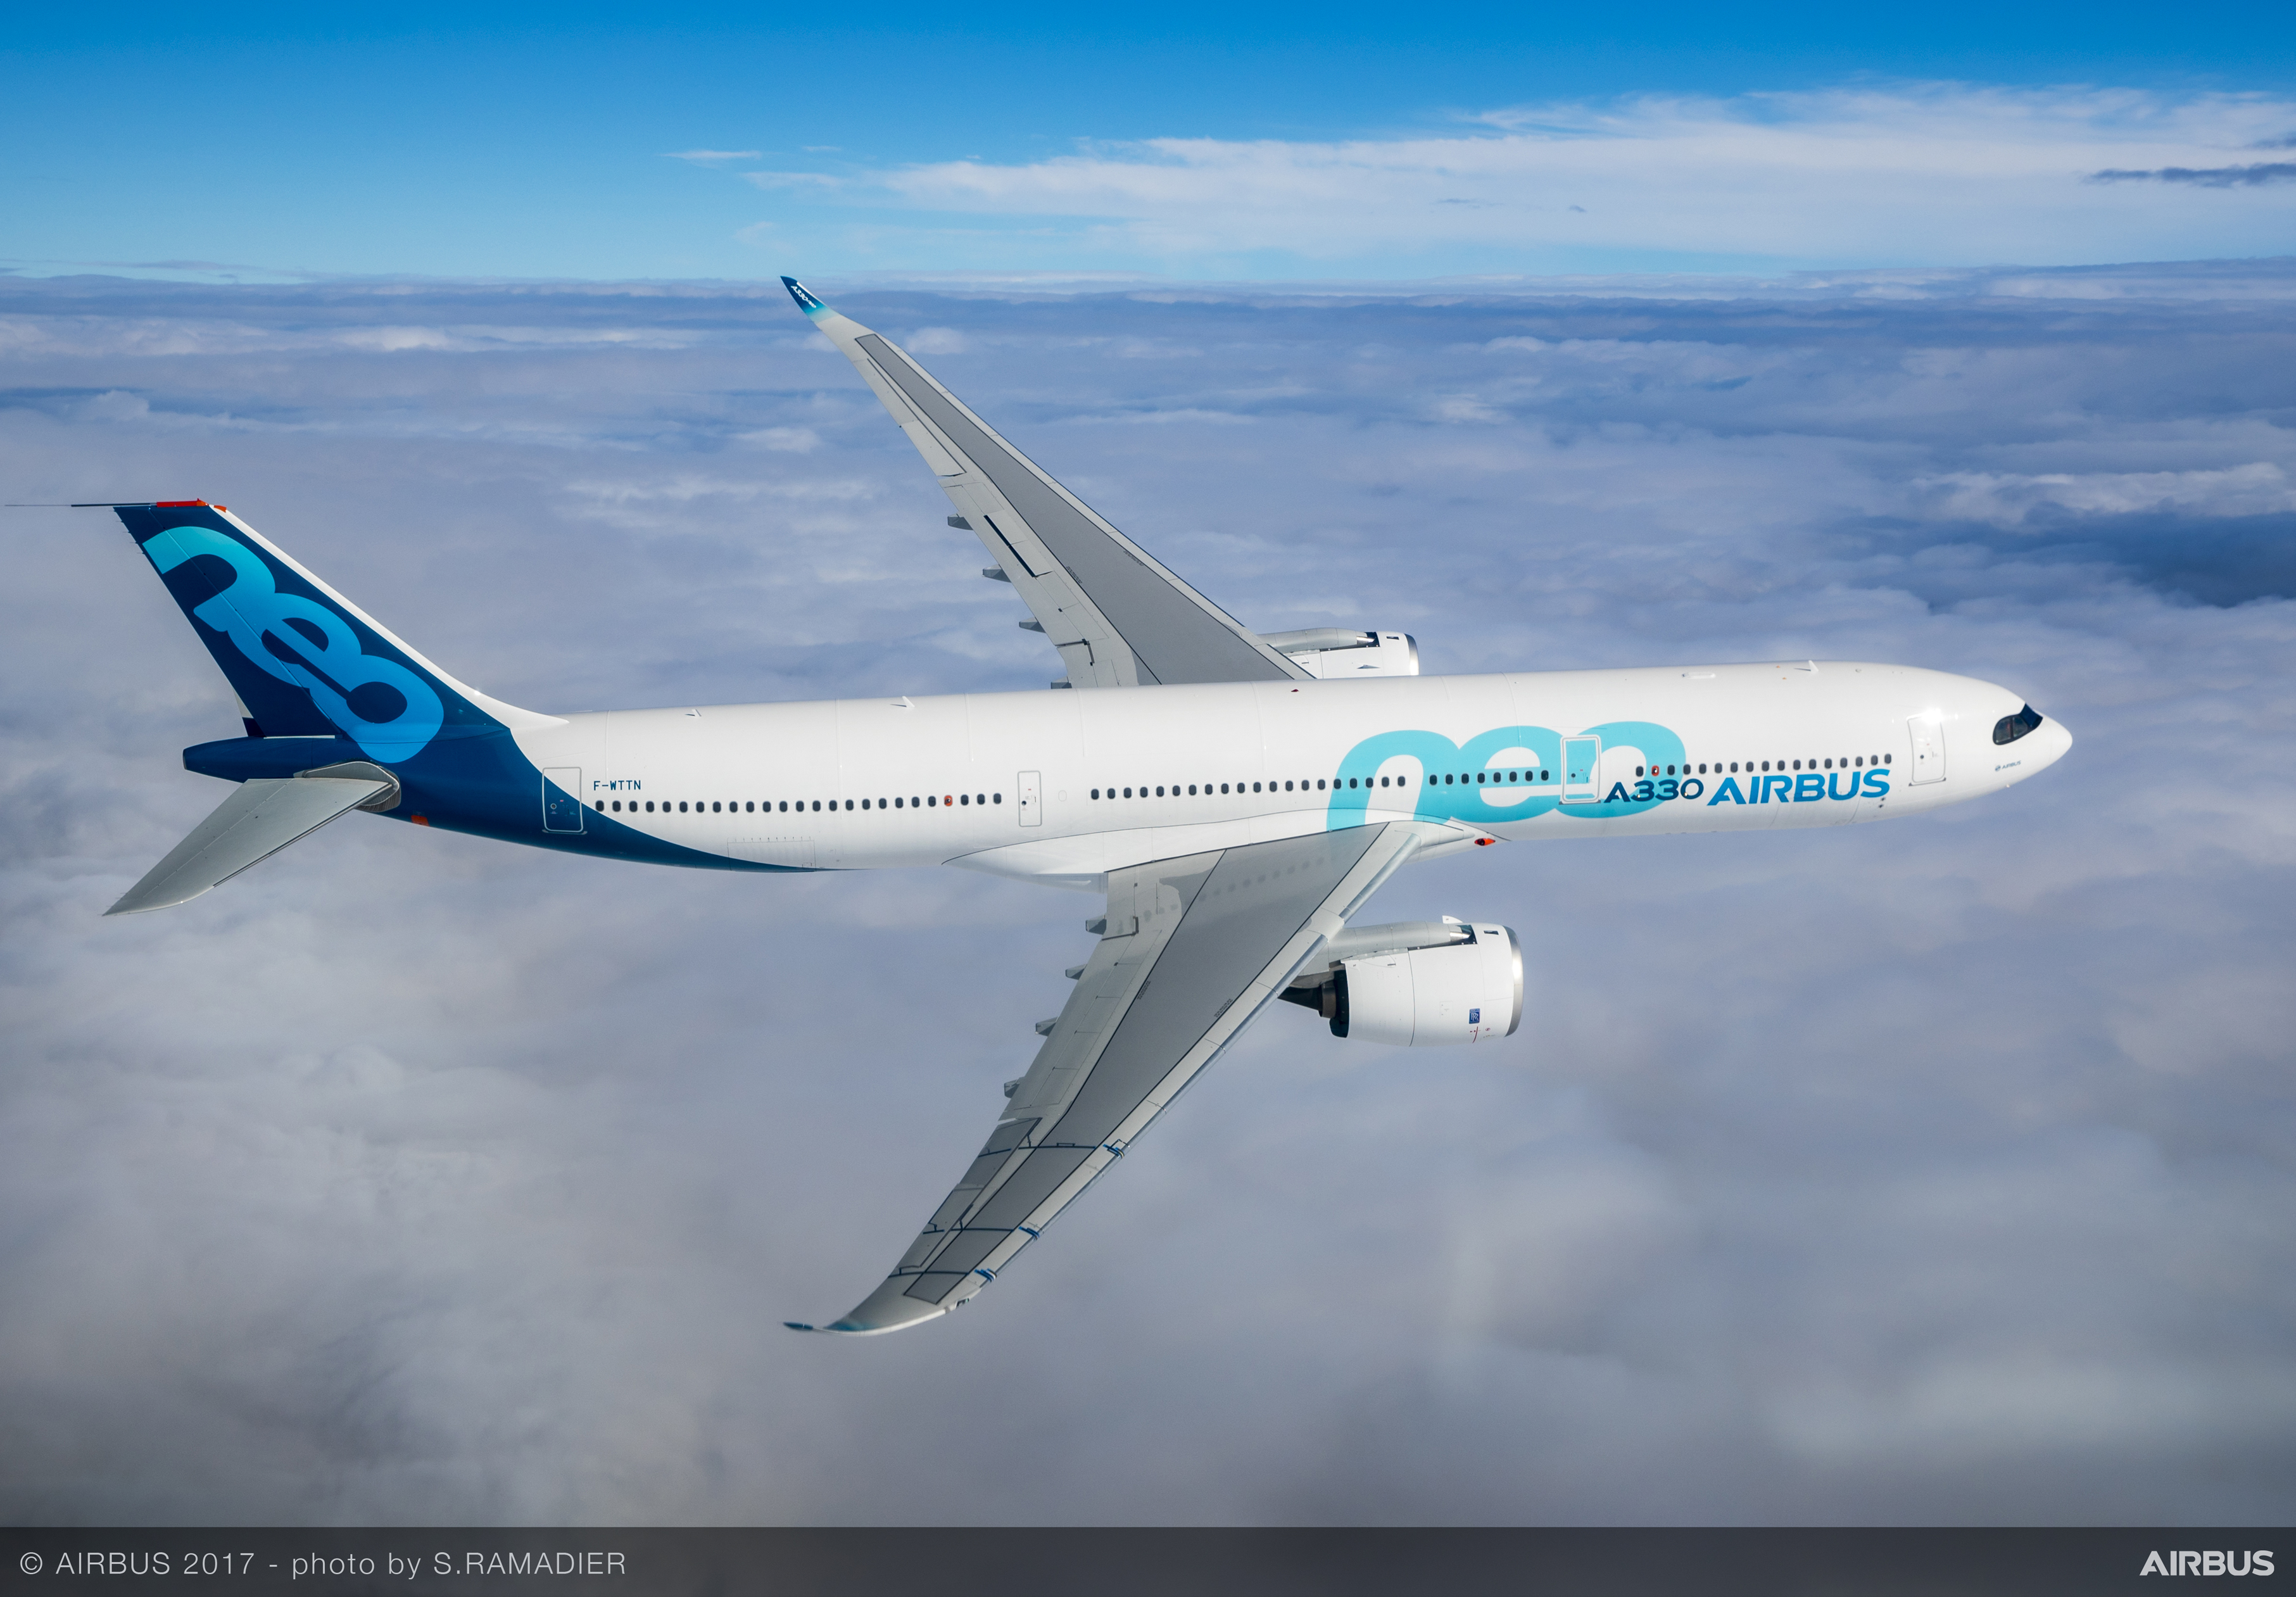 Эирбас. Airbus a330. A330 Neo. Эйрбас а 330 900 Нео. Airbus a330-900neo.